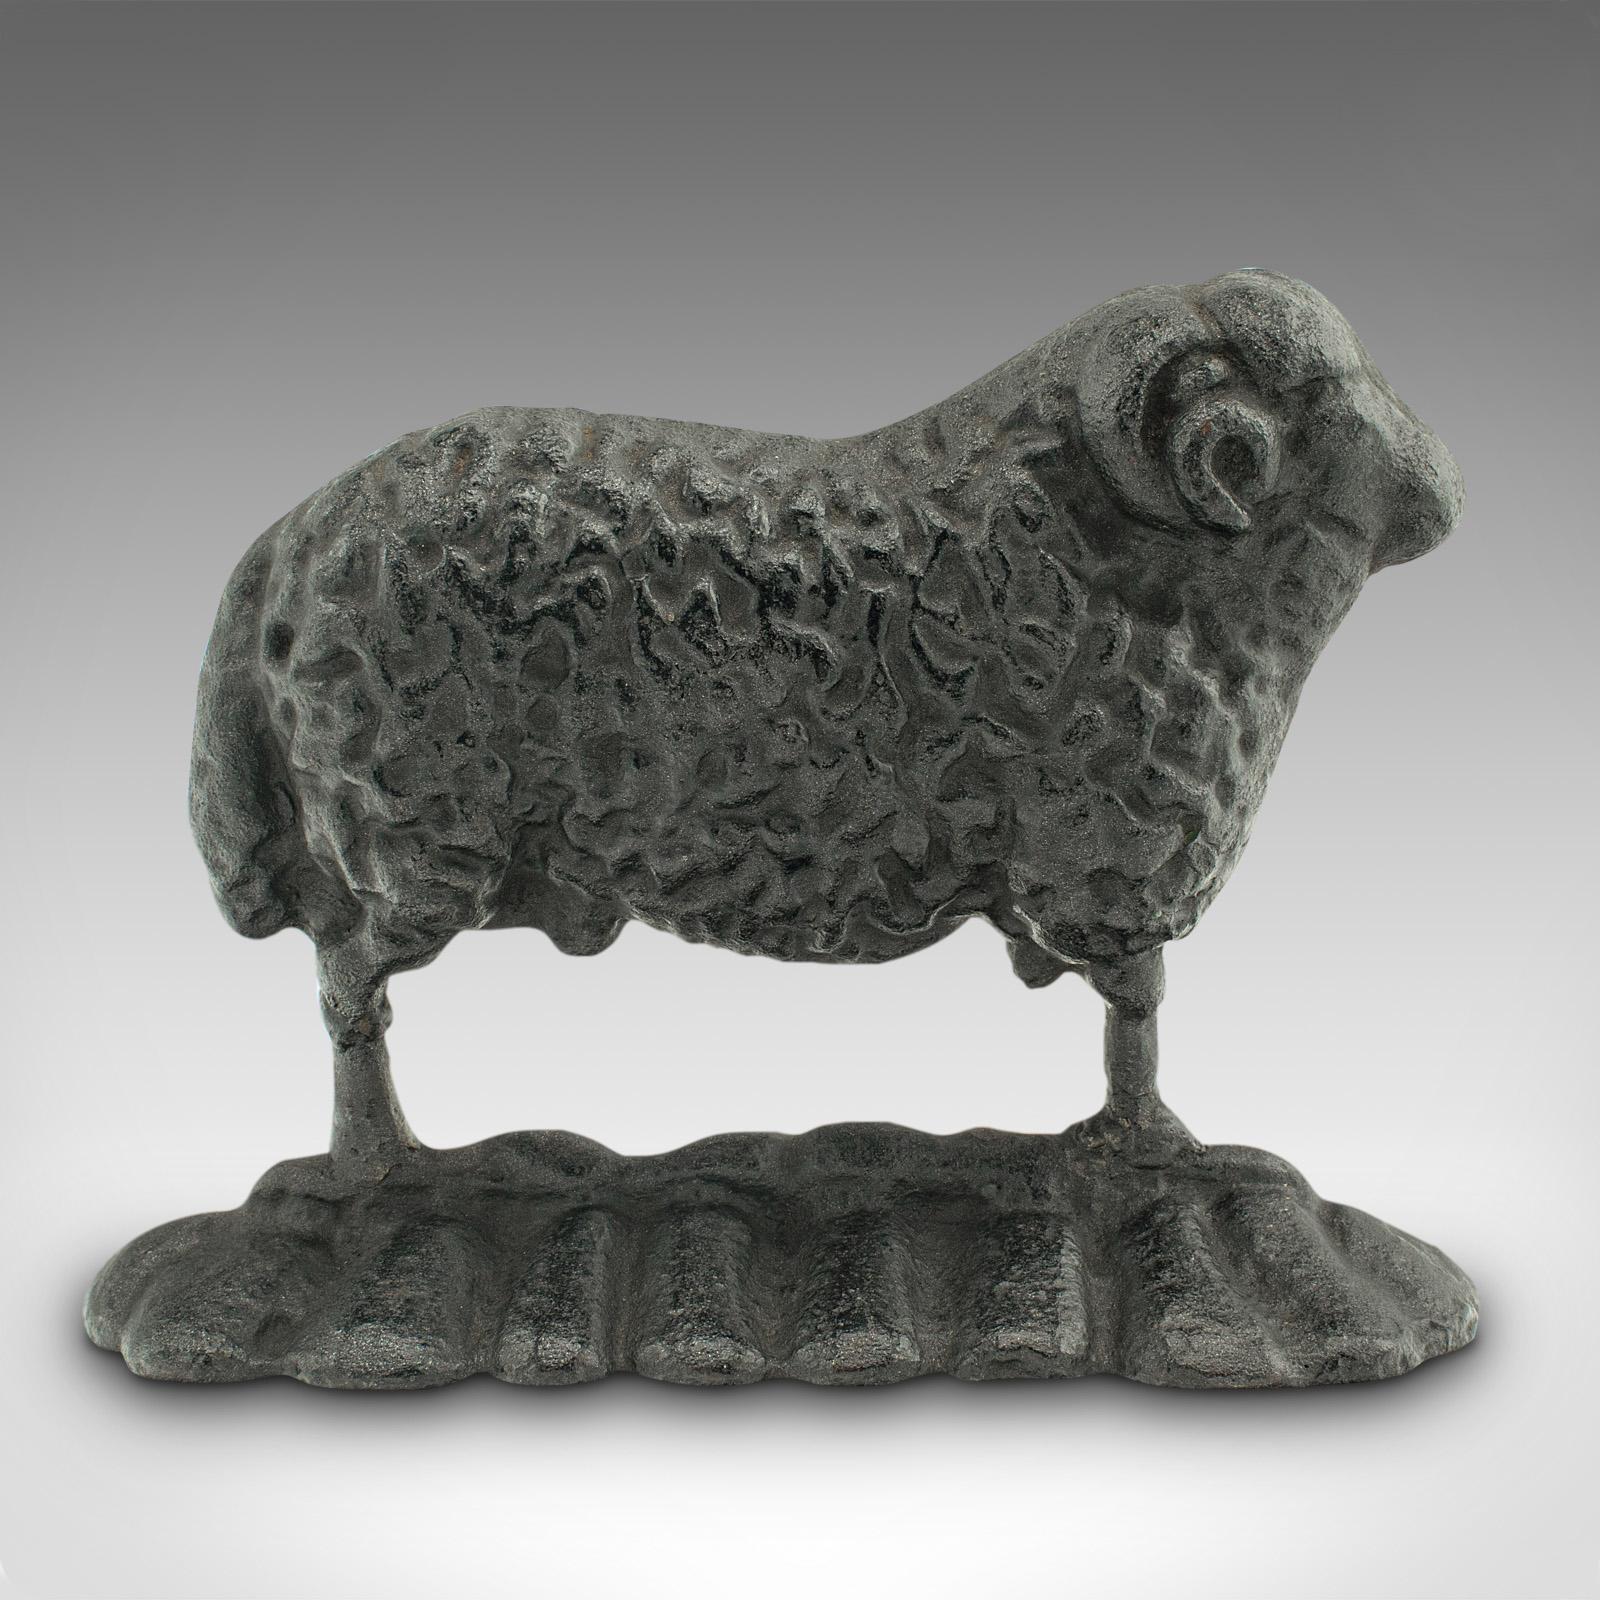 This is an antique sheep doorstop. An English cast iron decorative farmhouse door keeper, dating to the late Victorian period, circa 1900.

Farmhouse appeal to this charming figurative door stopper.
Displays a desirable aged patina and in good